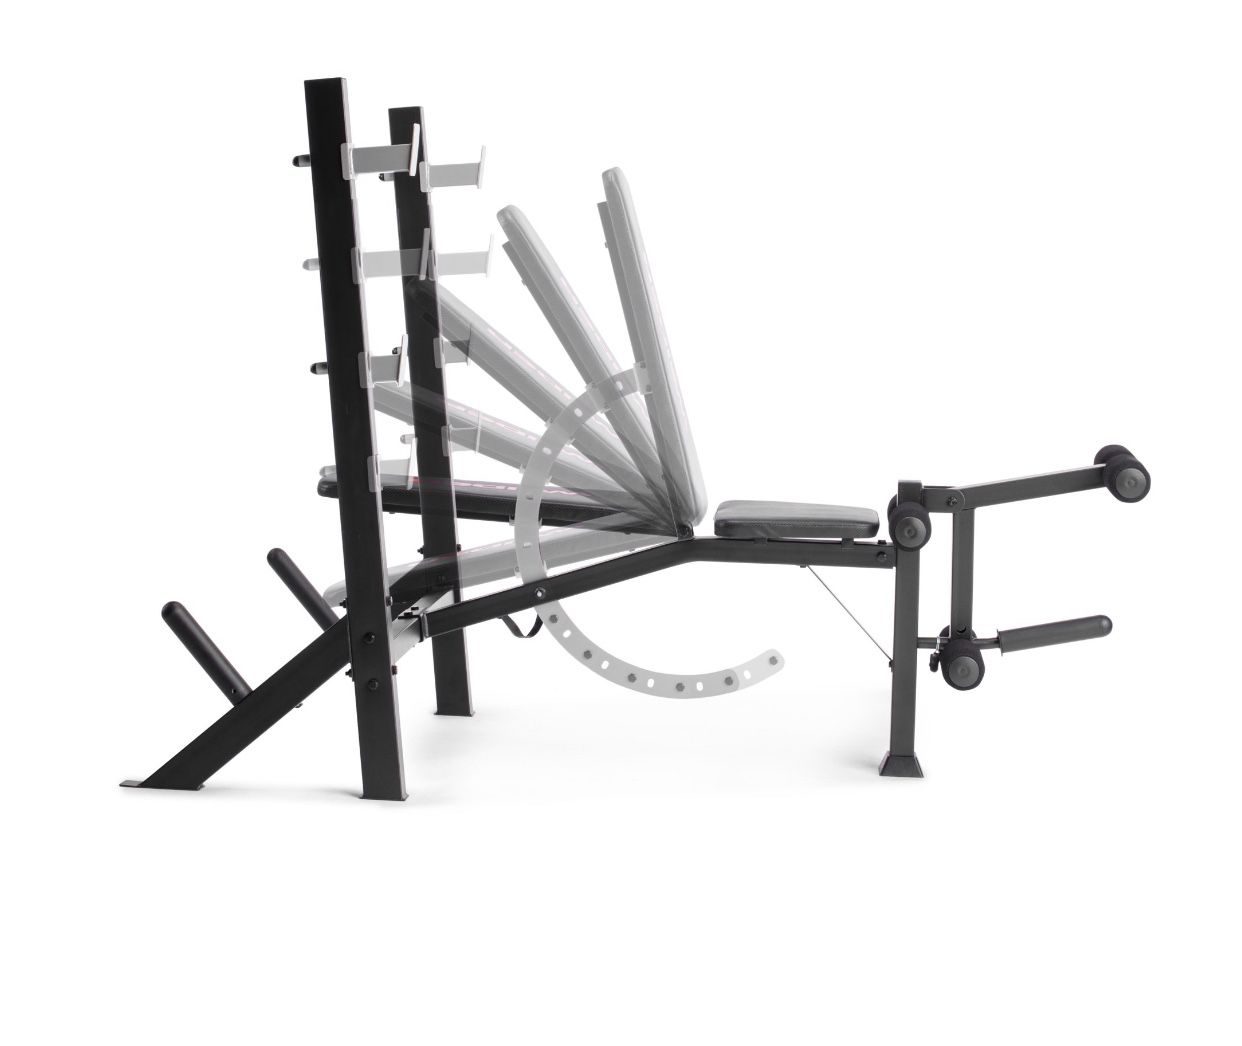 NEW IN BOX Olympic bench press